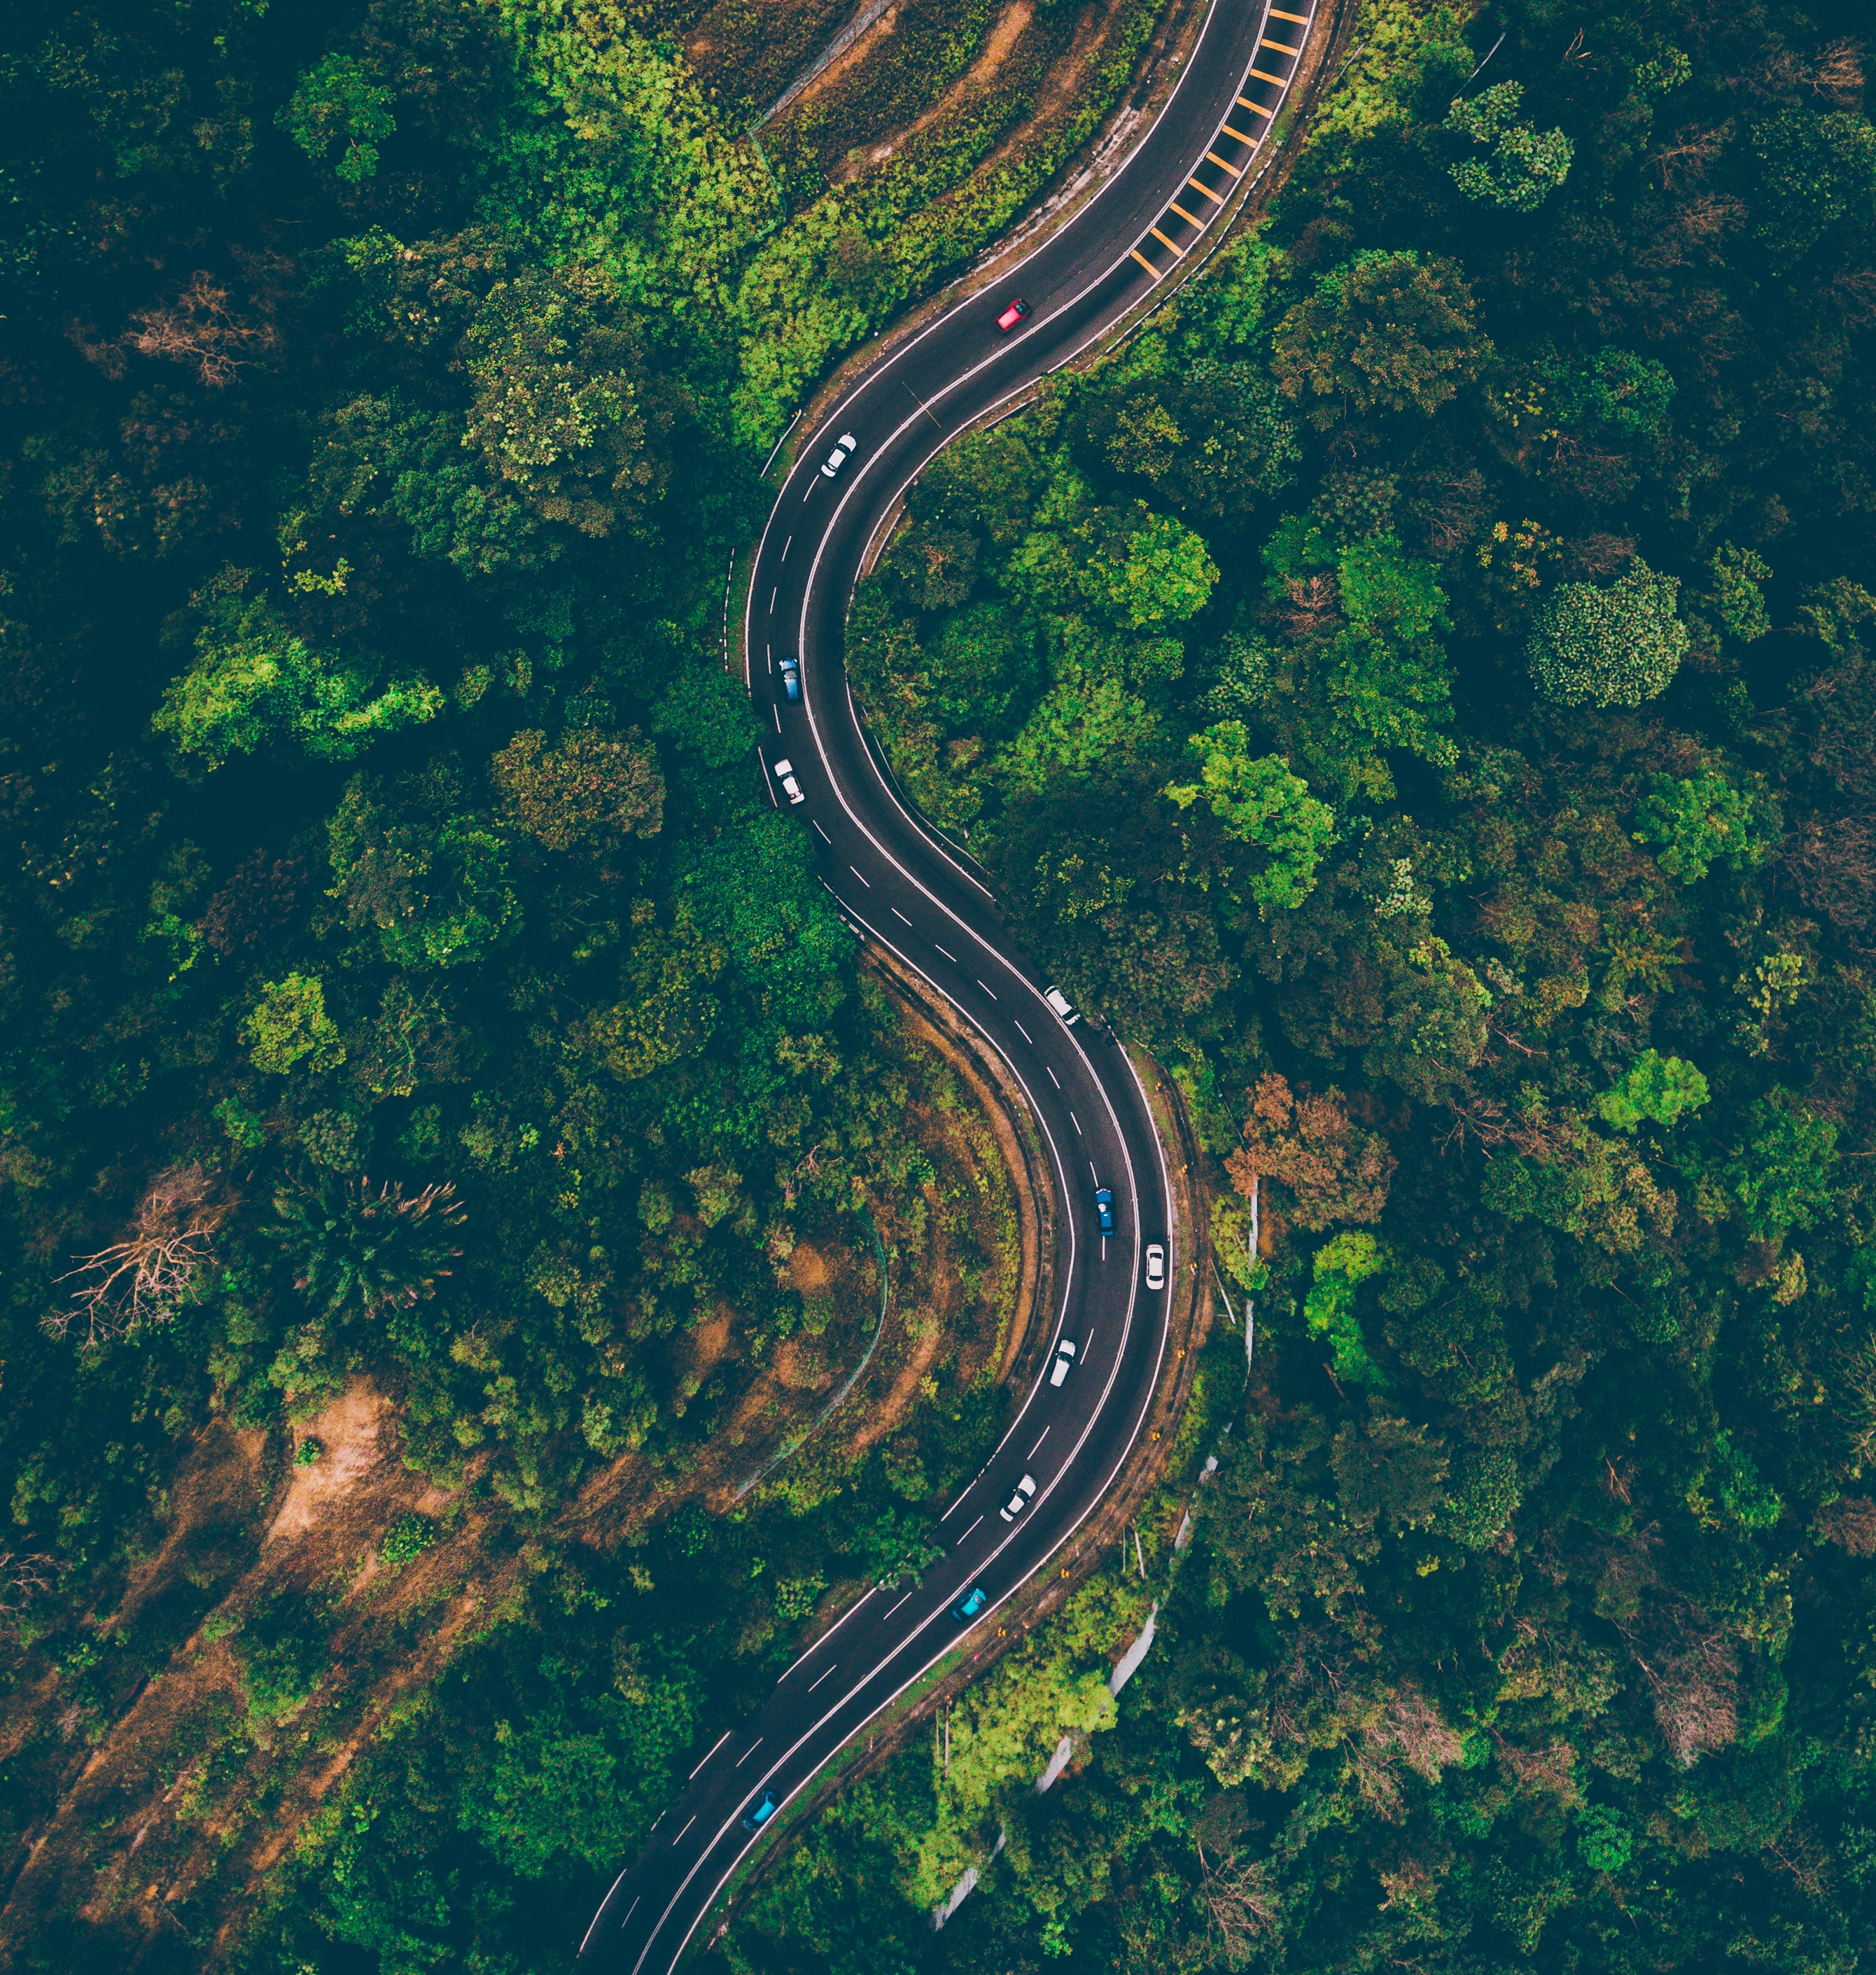 road, view from above, sinuous, nature, trees, winding, malaysia, batang kali cellphone